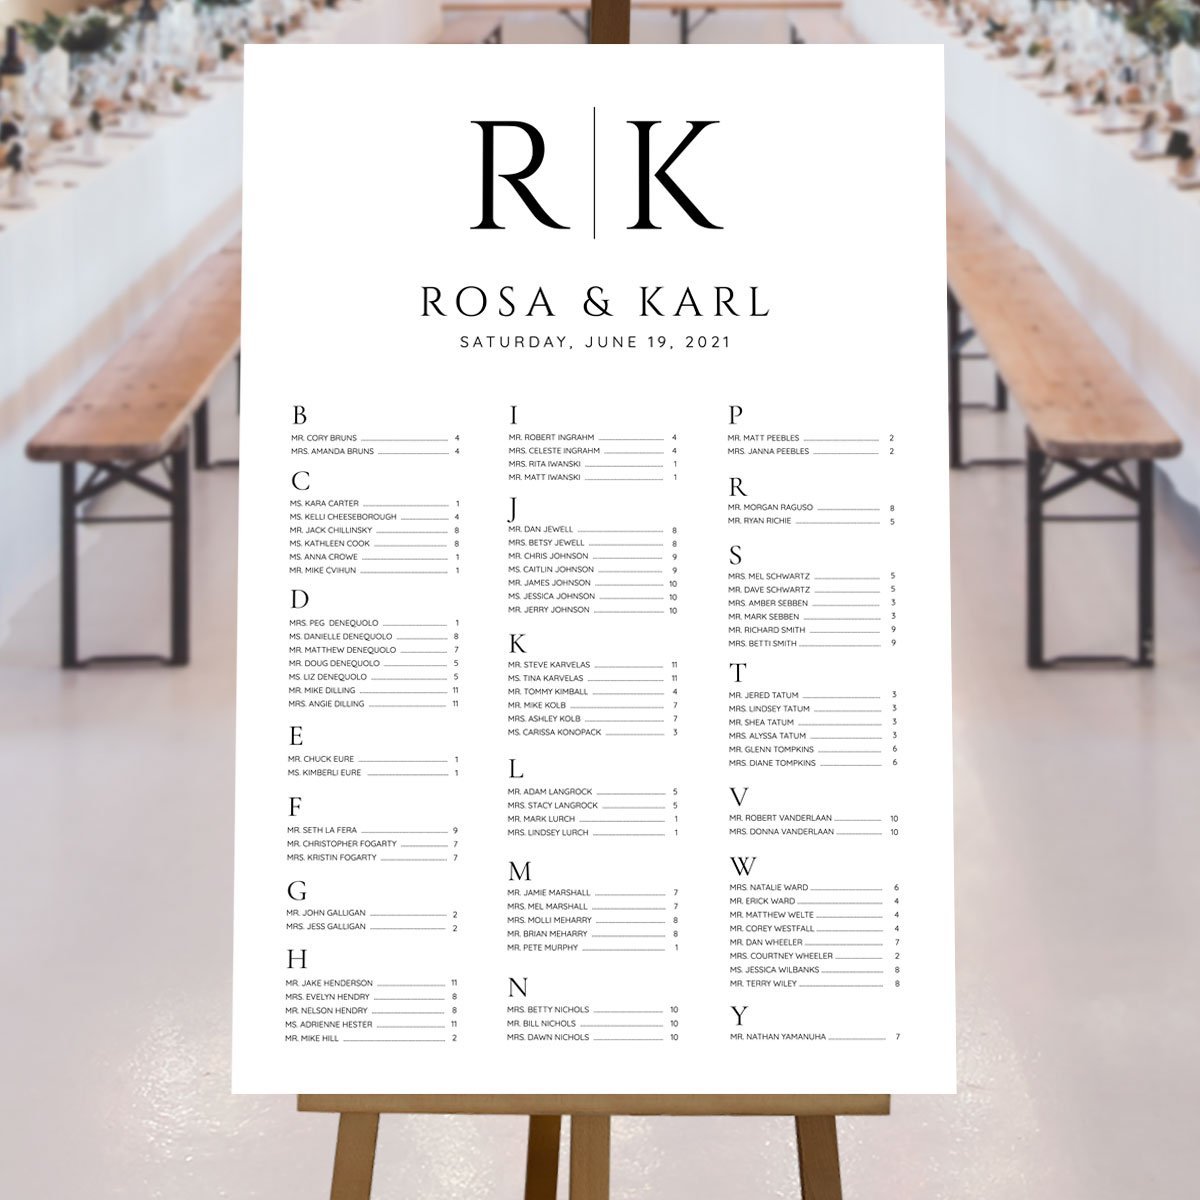 black & white bride and groom initials a-z seating plan at wedding reception